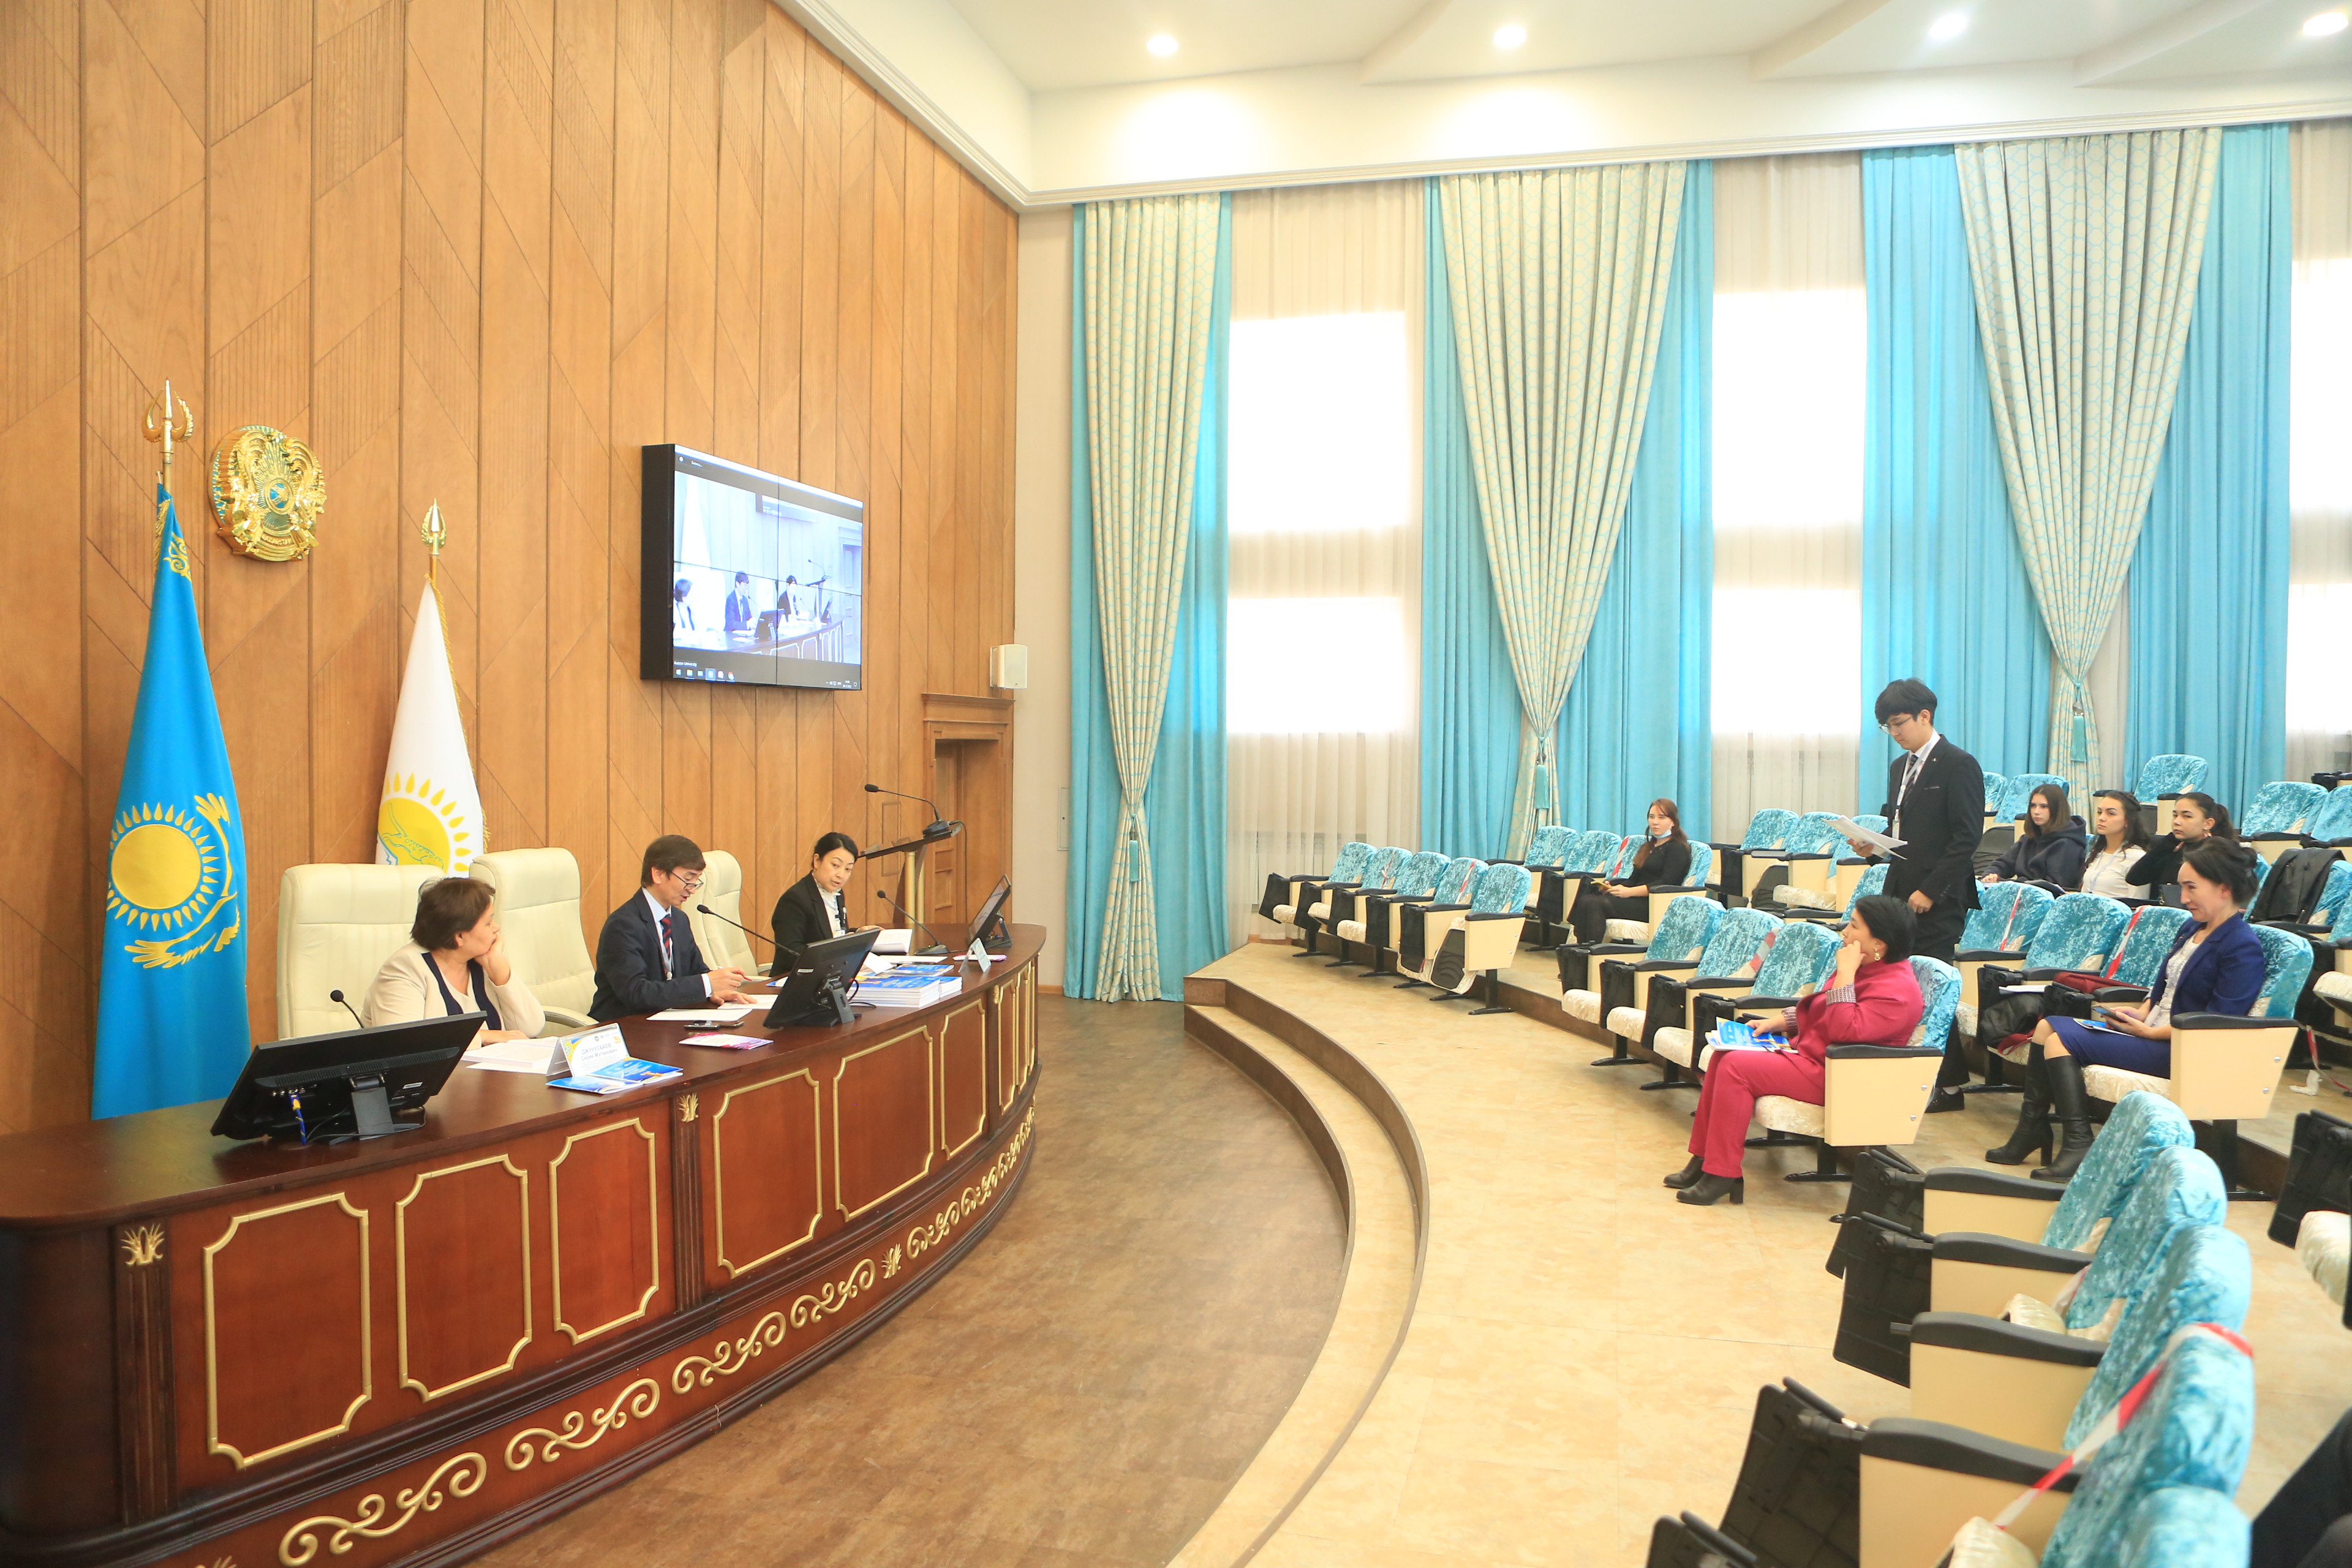 December 3, 2021 at 10:30 a.m. Auezov South Kazakhstan University organizes an international scientific and practical conference 